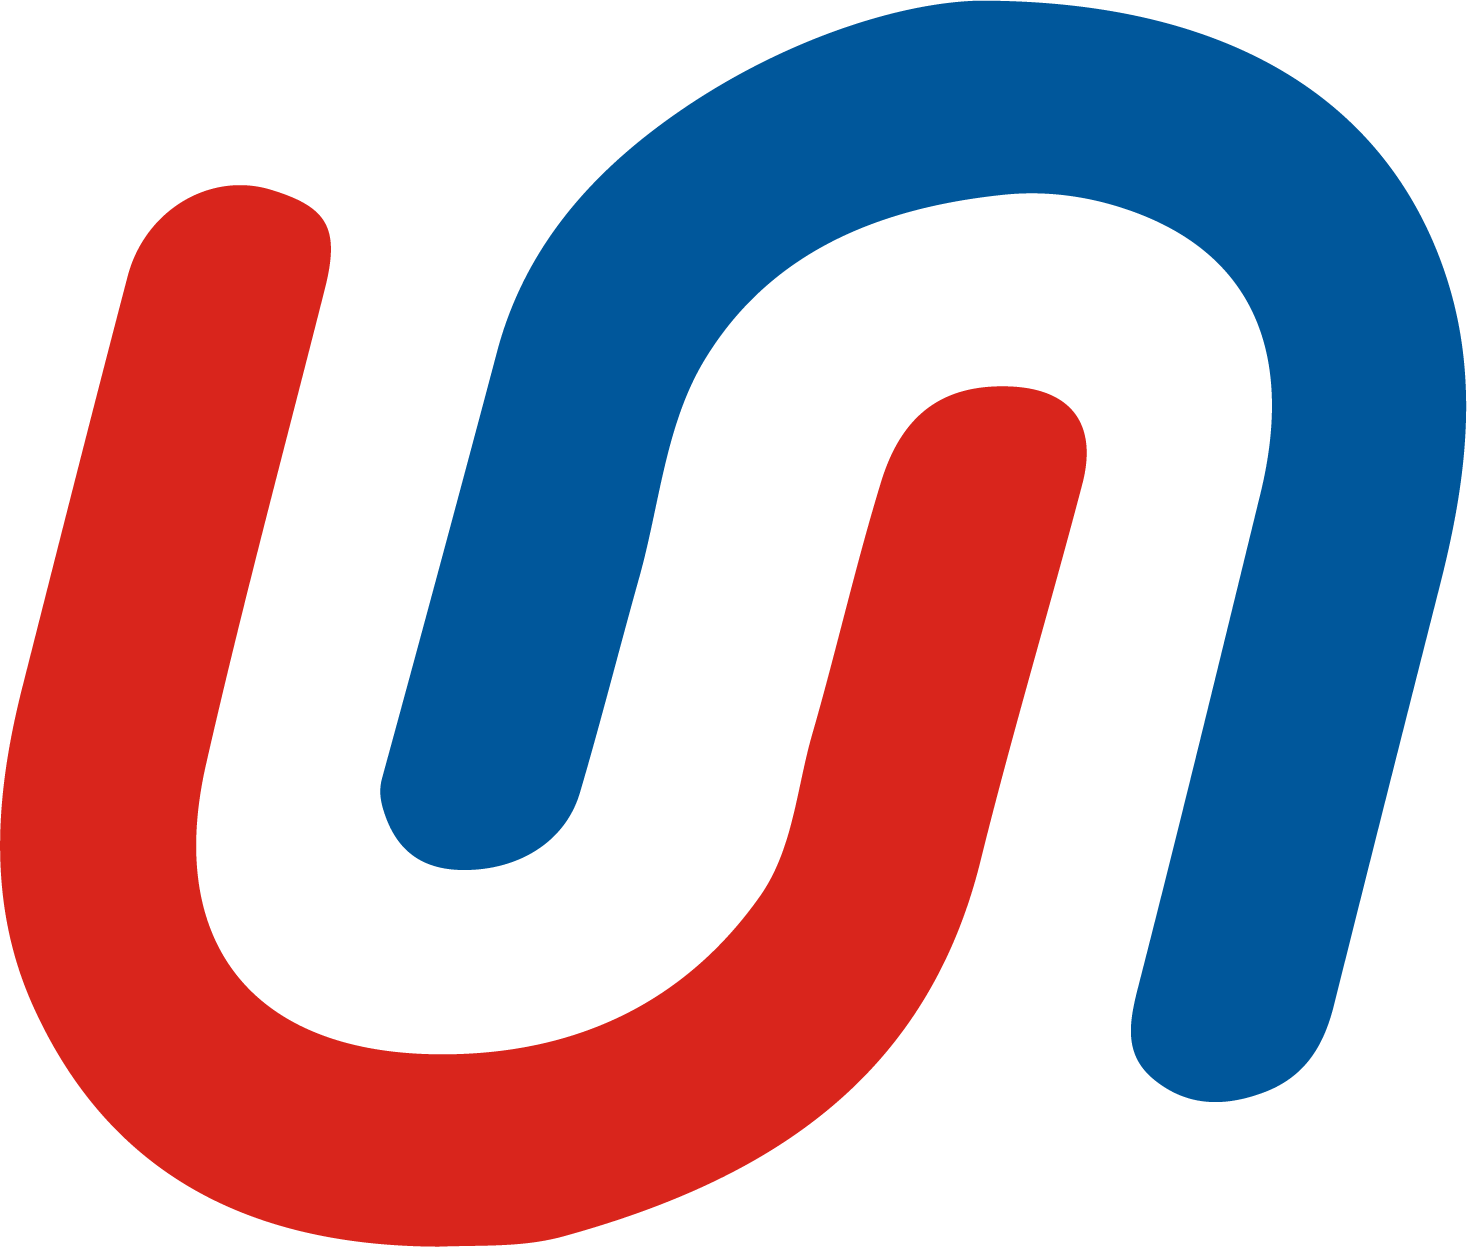 Union Bank of India has allotted 57.77 crore shares at a price of Rs 86.55  per share